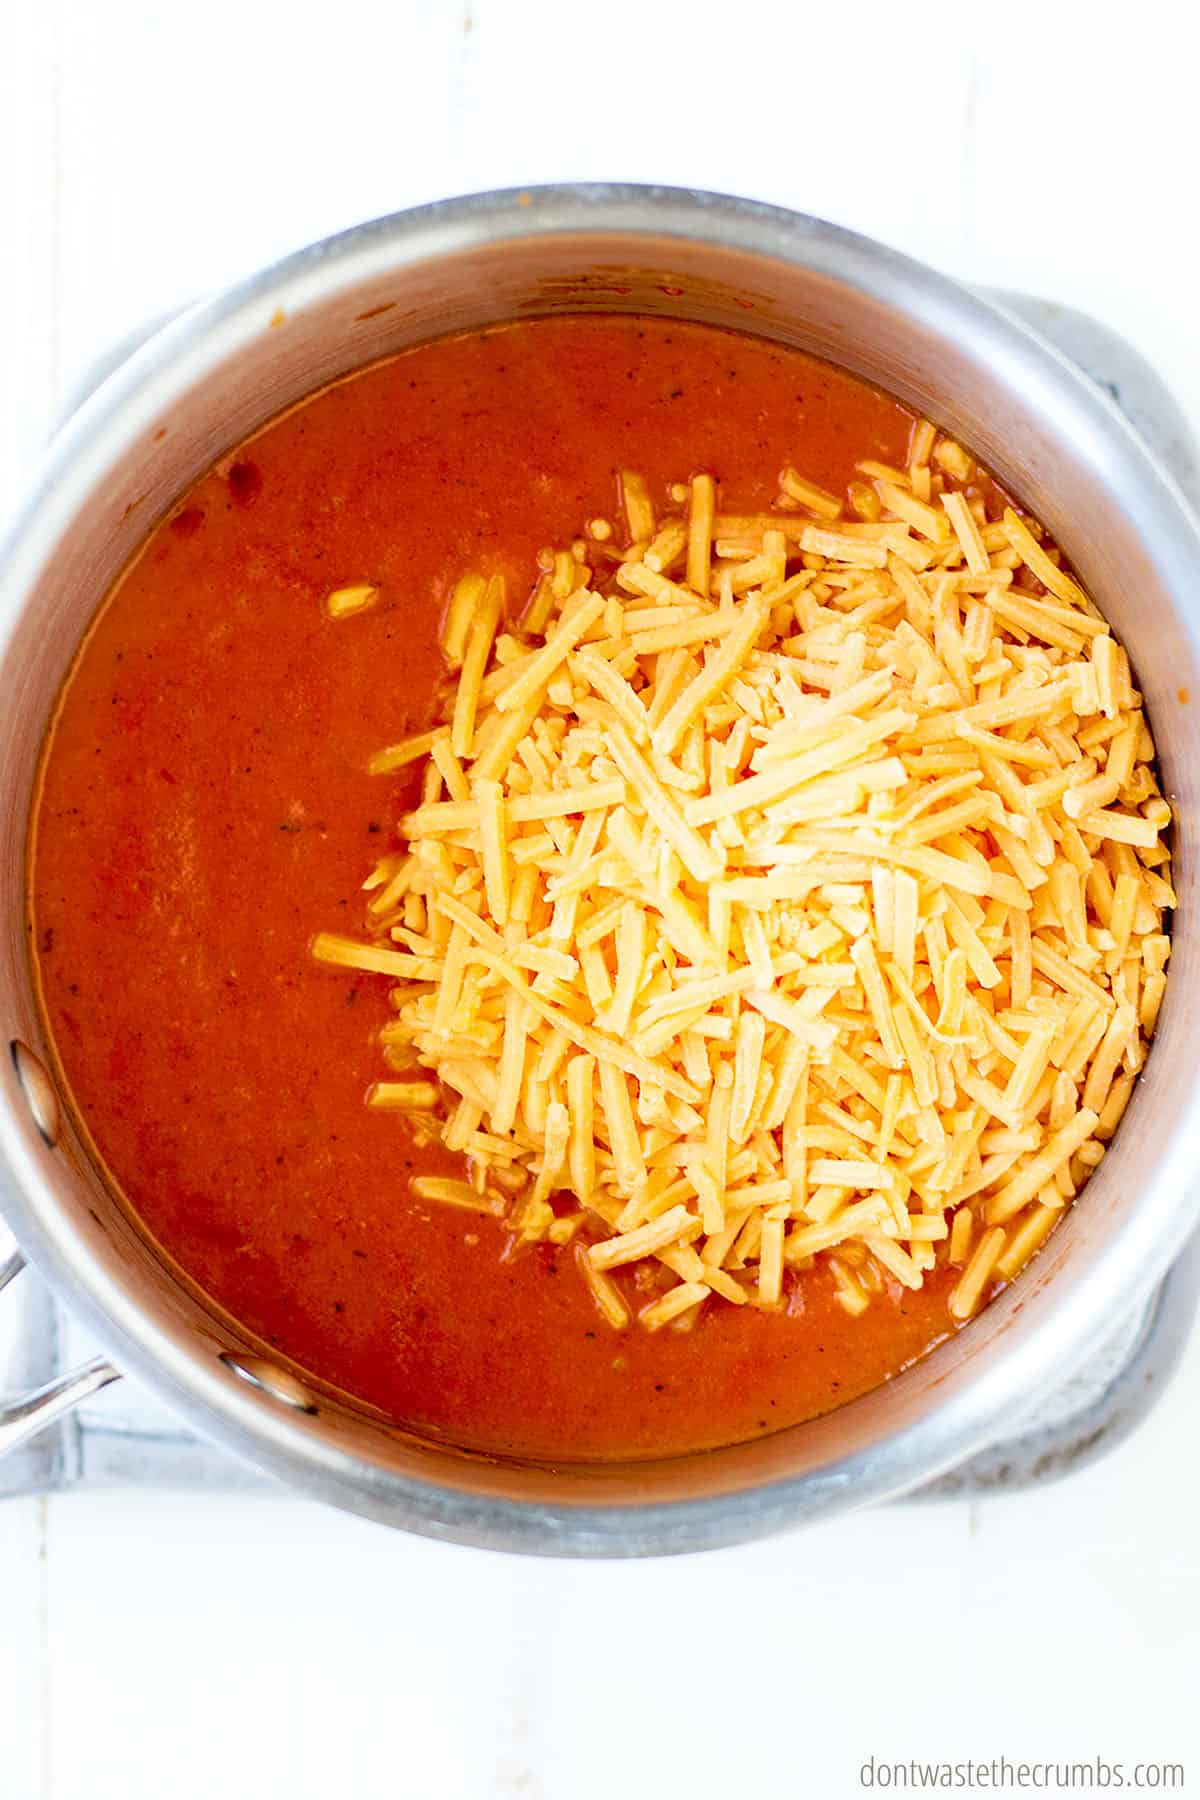 Add shredded cheddar cheese to homemade sauce for spaghetti o's.